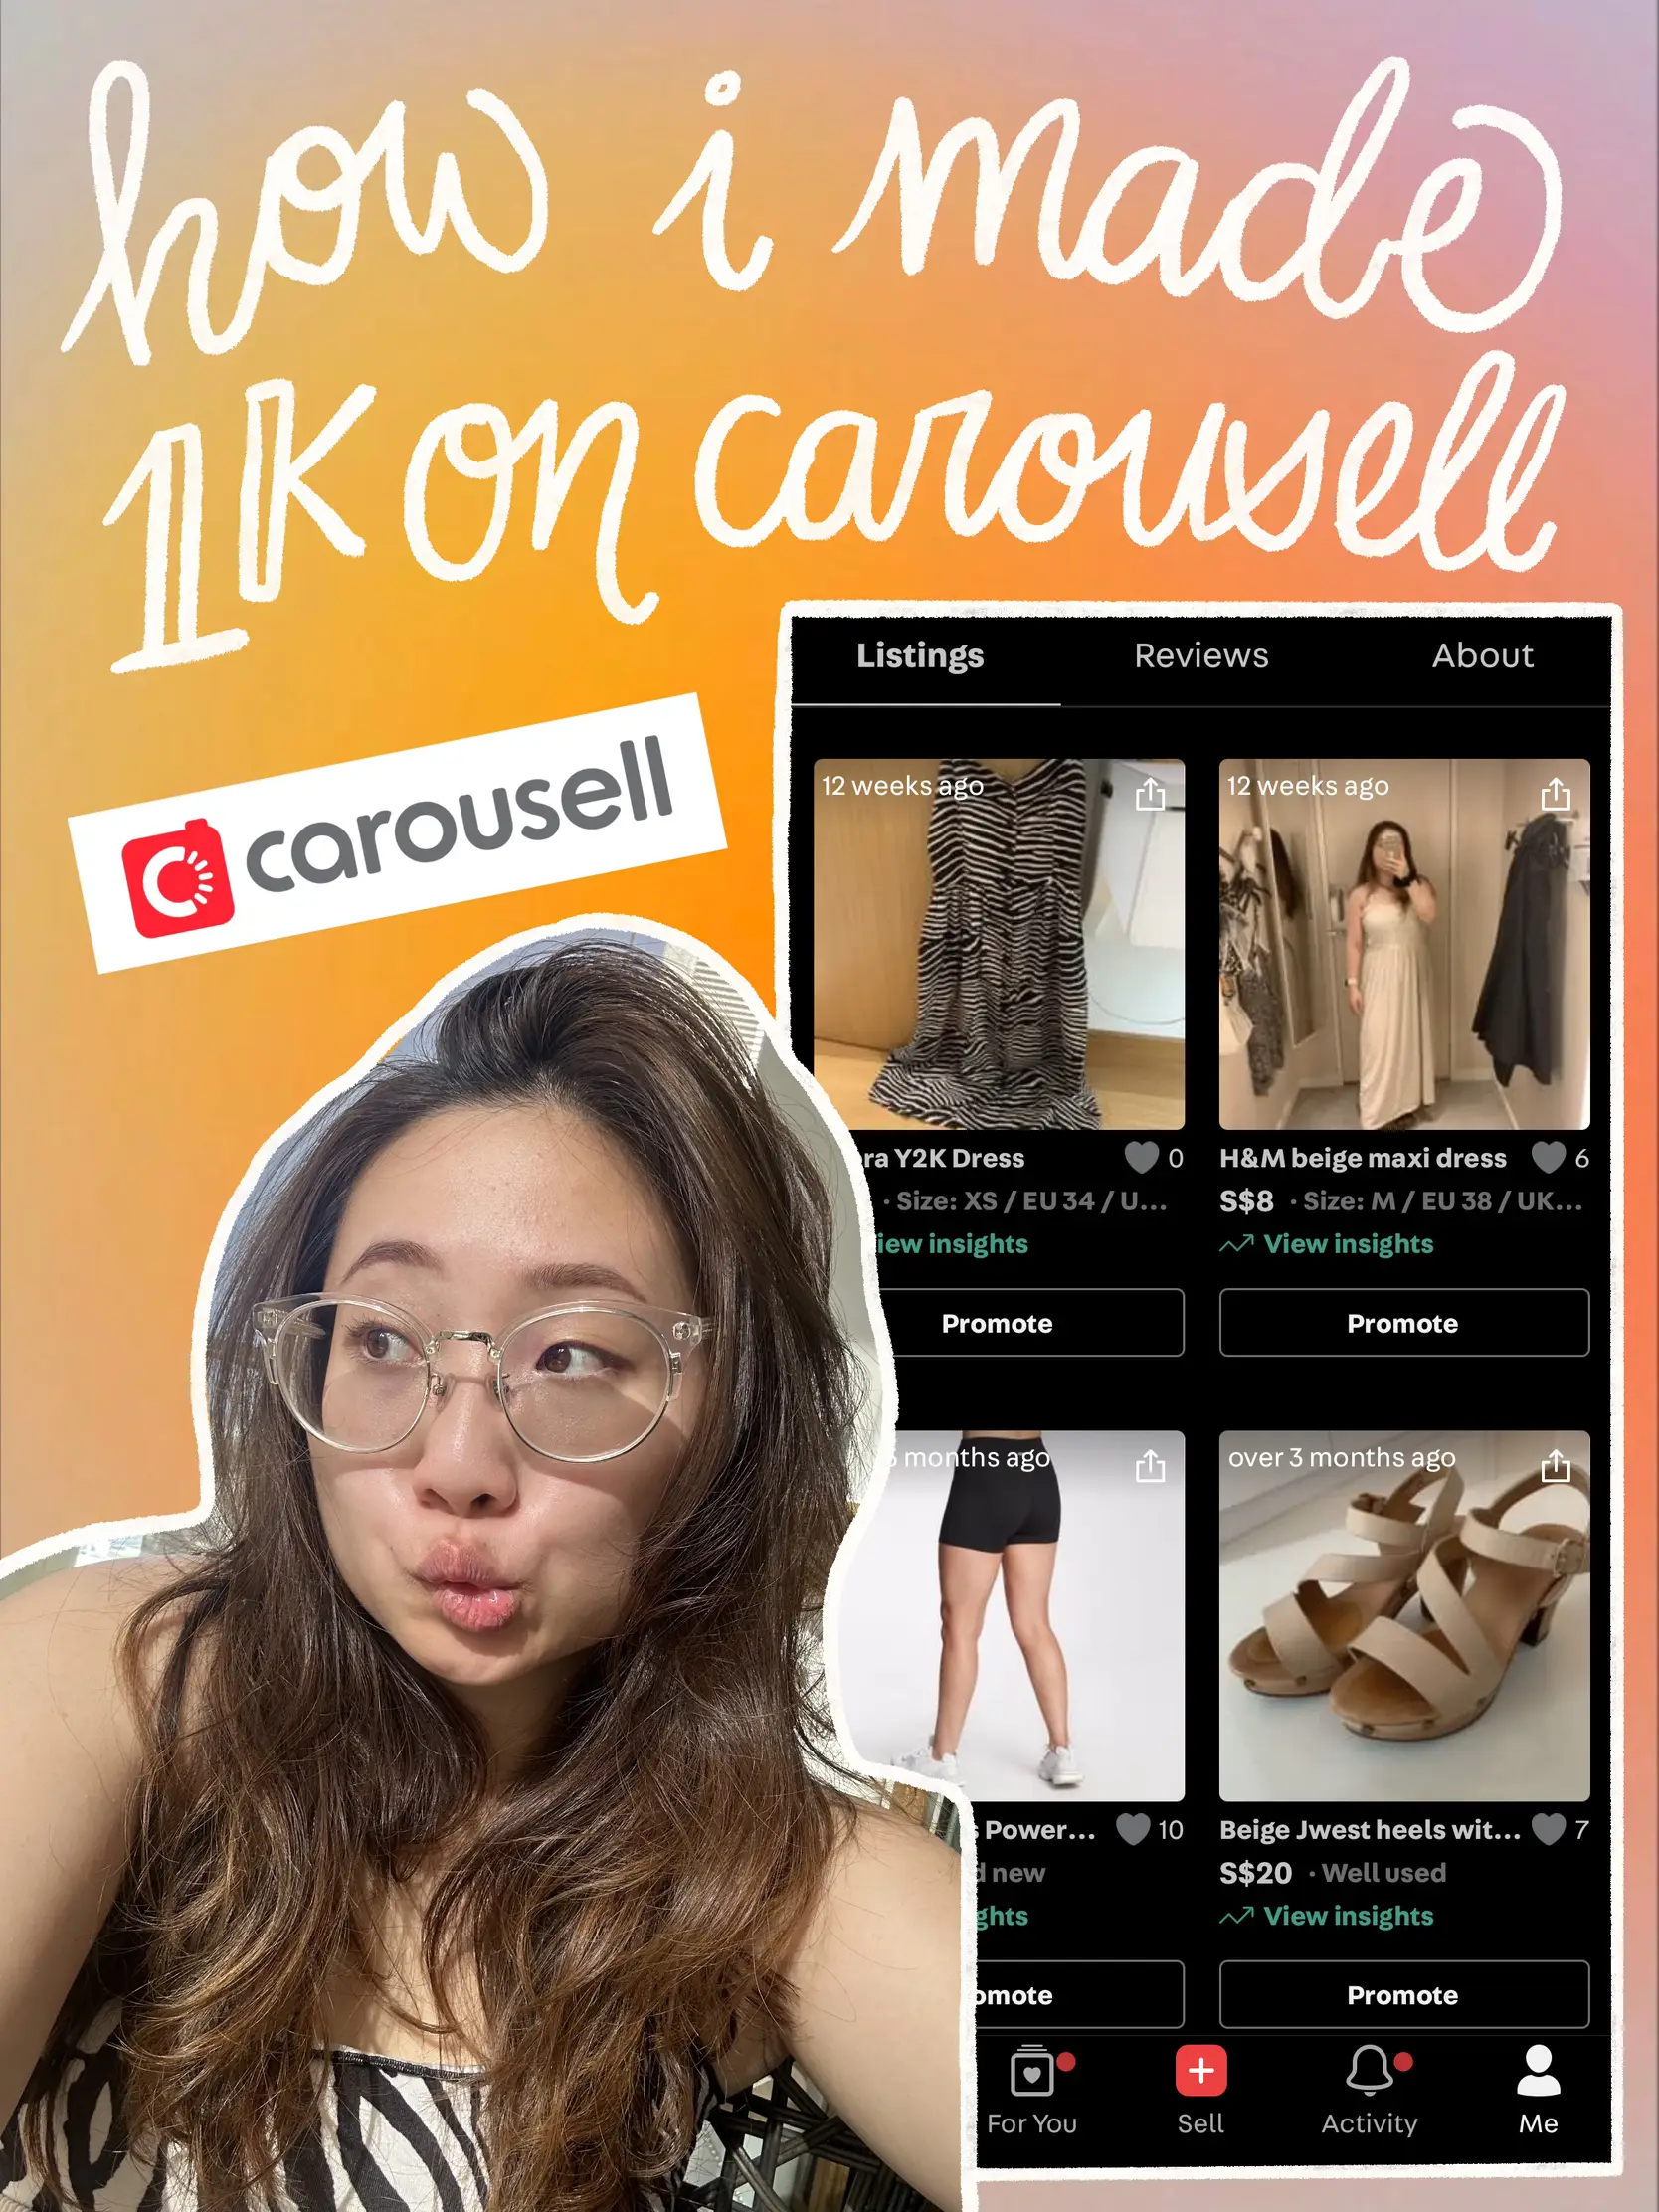 How I made 1k+ on carousel!'s images(0)